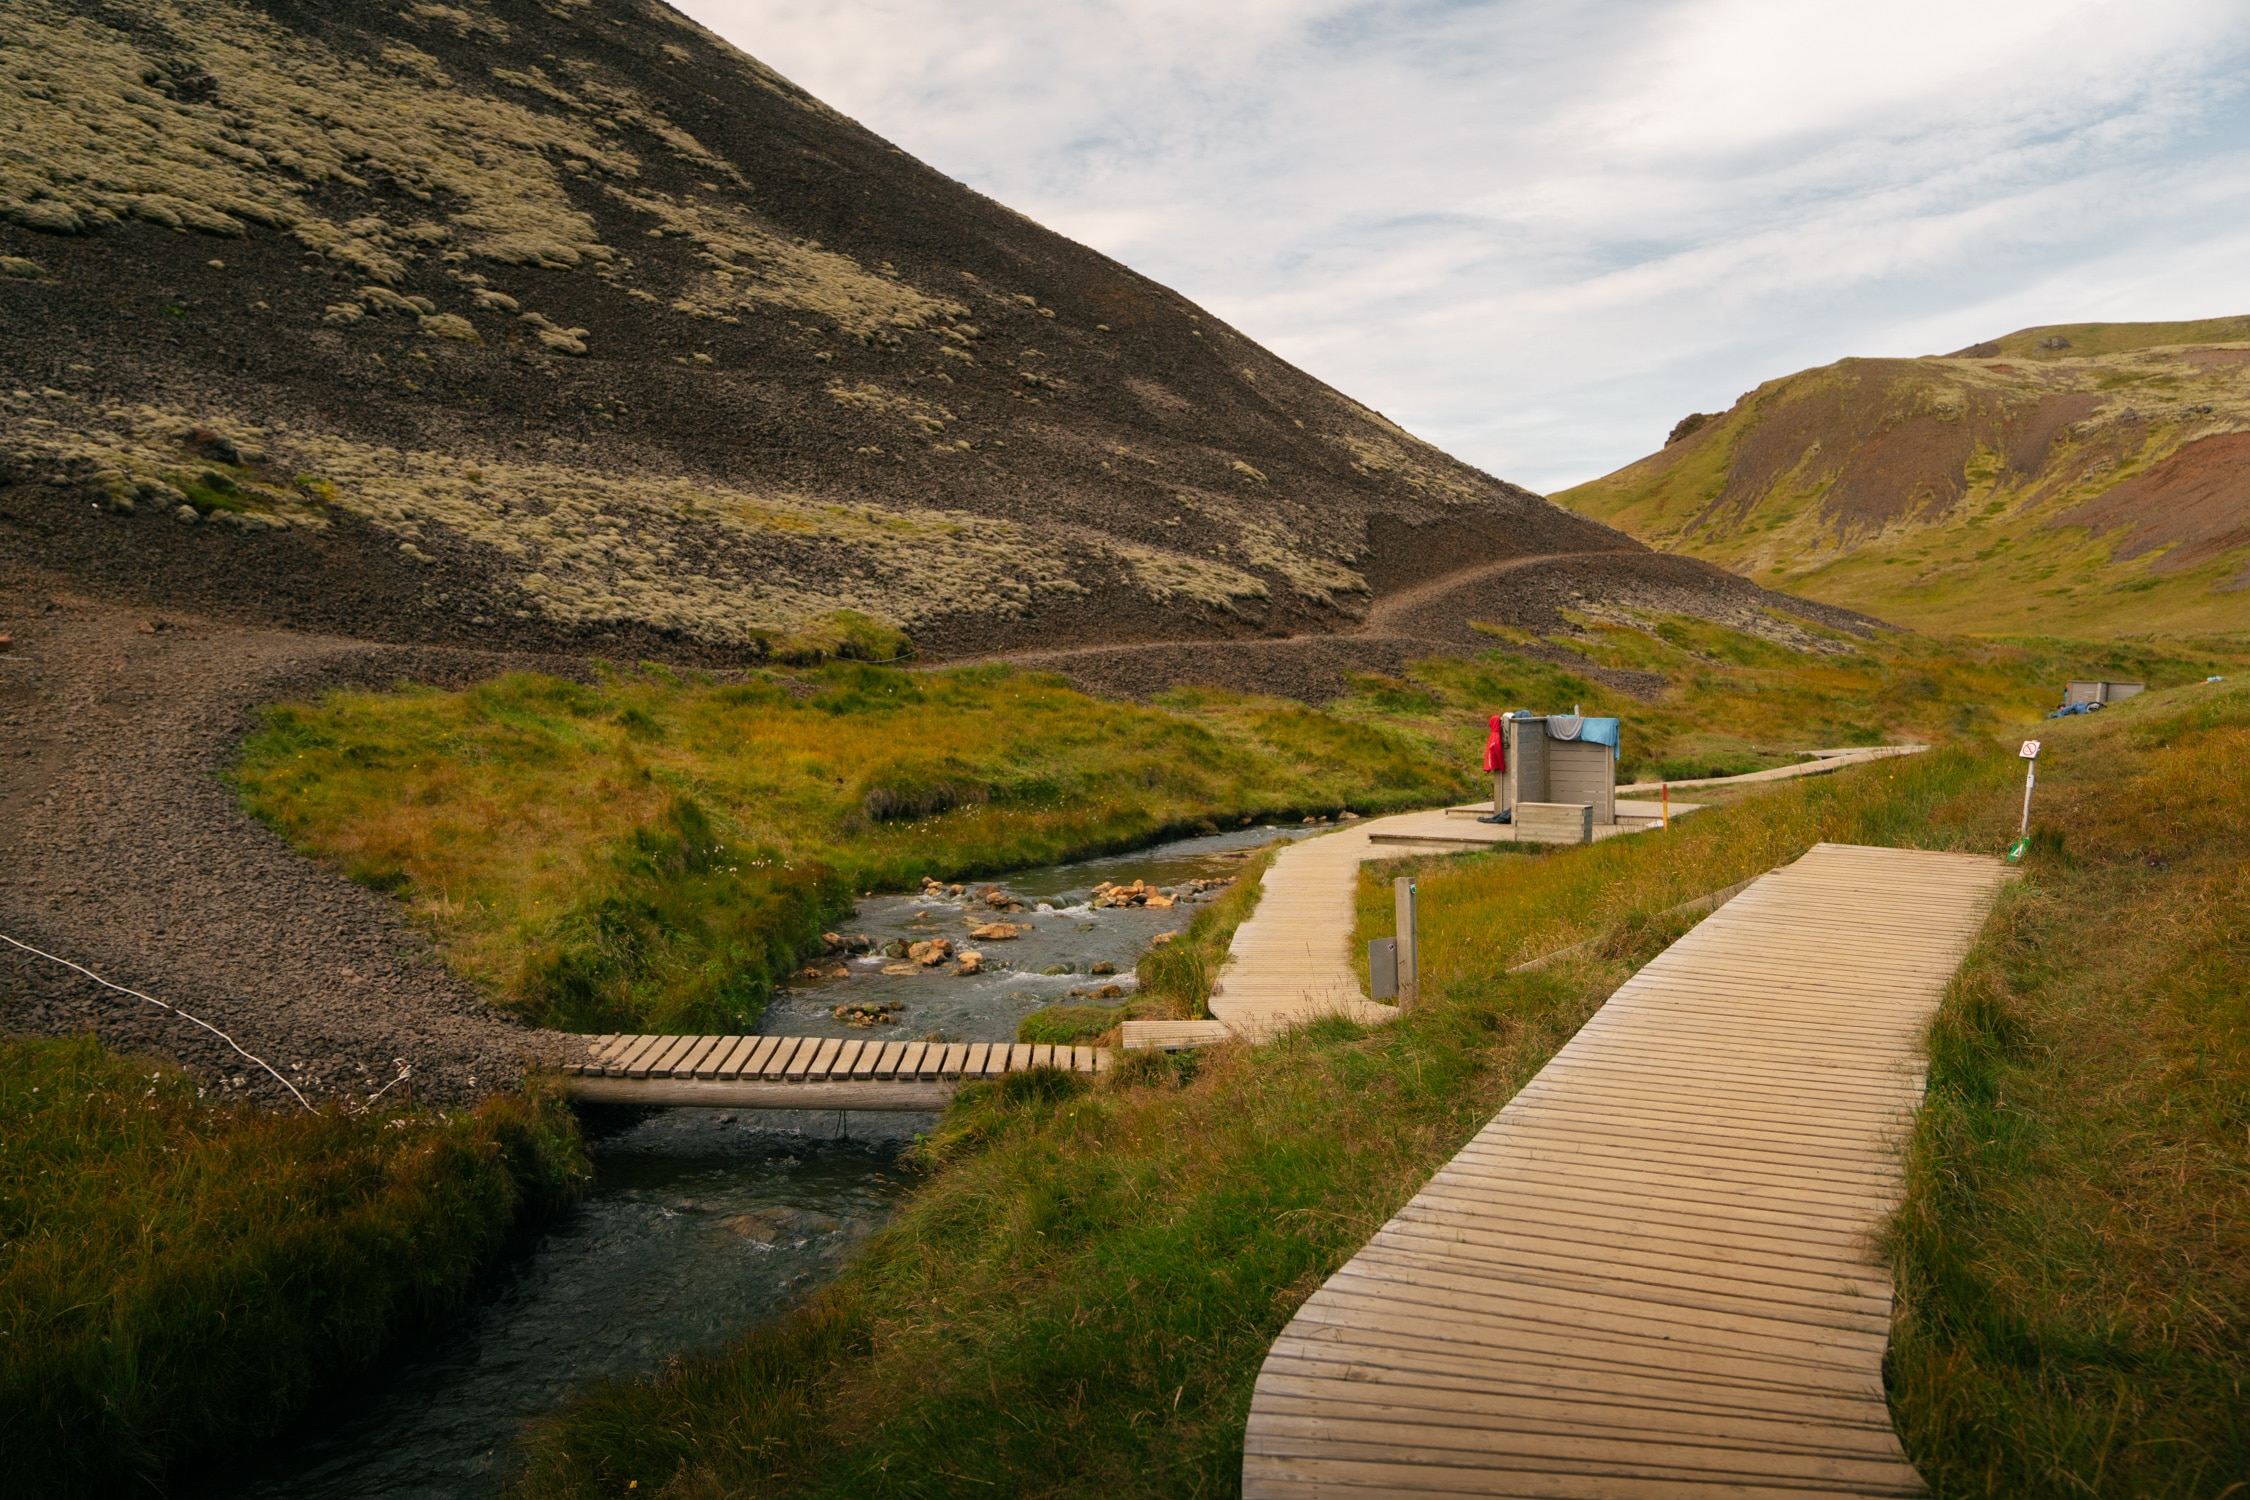 Guide to the Reykjadalur Hot Spring Thermal River Hike